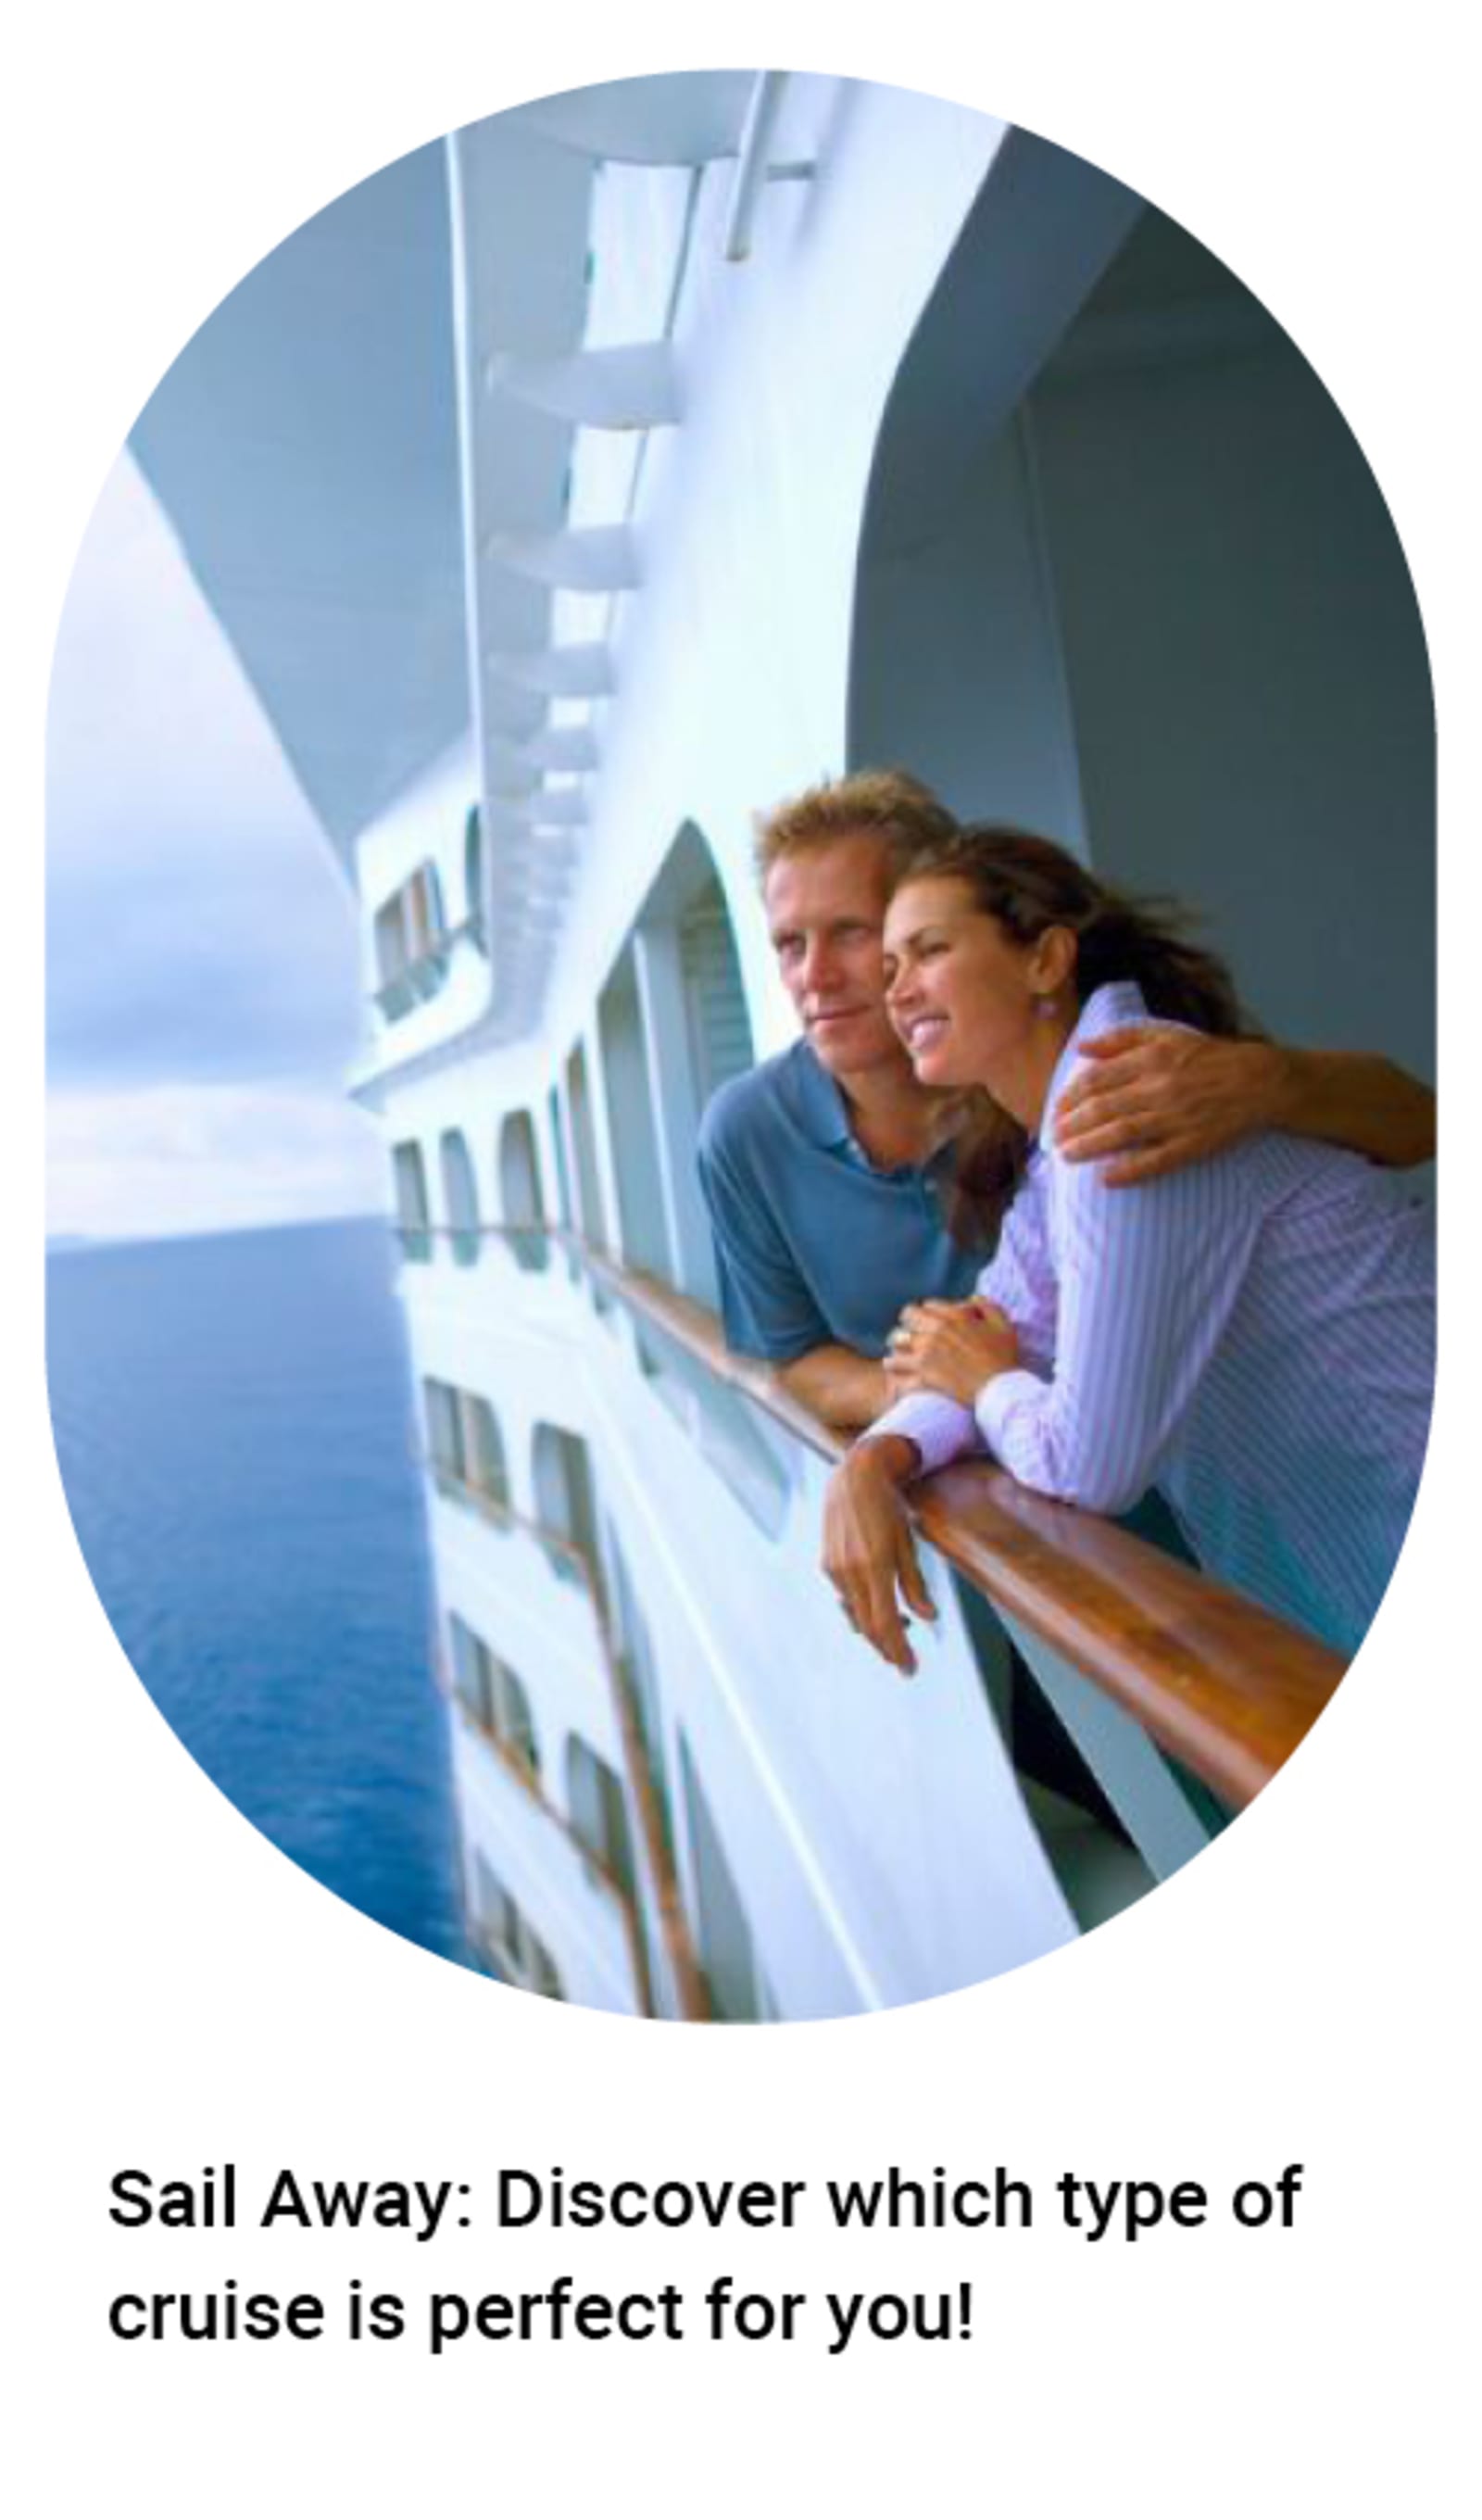 Couple hugging while on the edge of a cruise ship - Sail away. Discover which type of cruise is perfect for you!